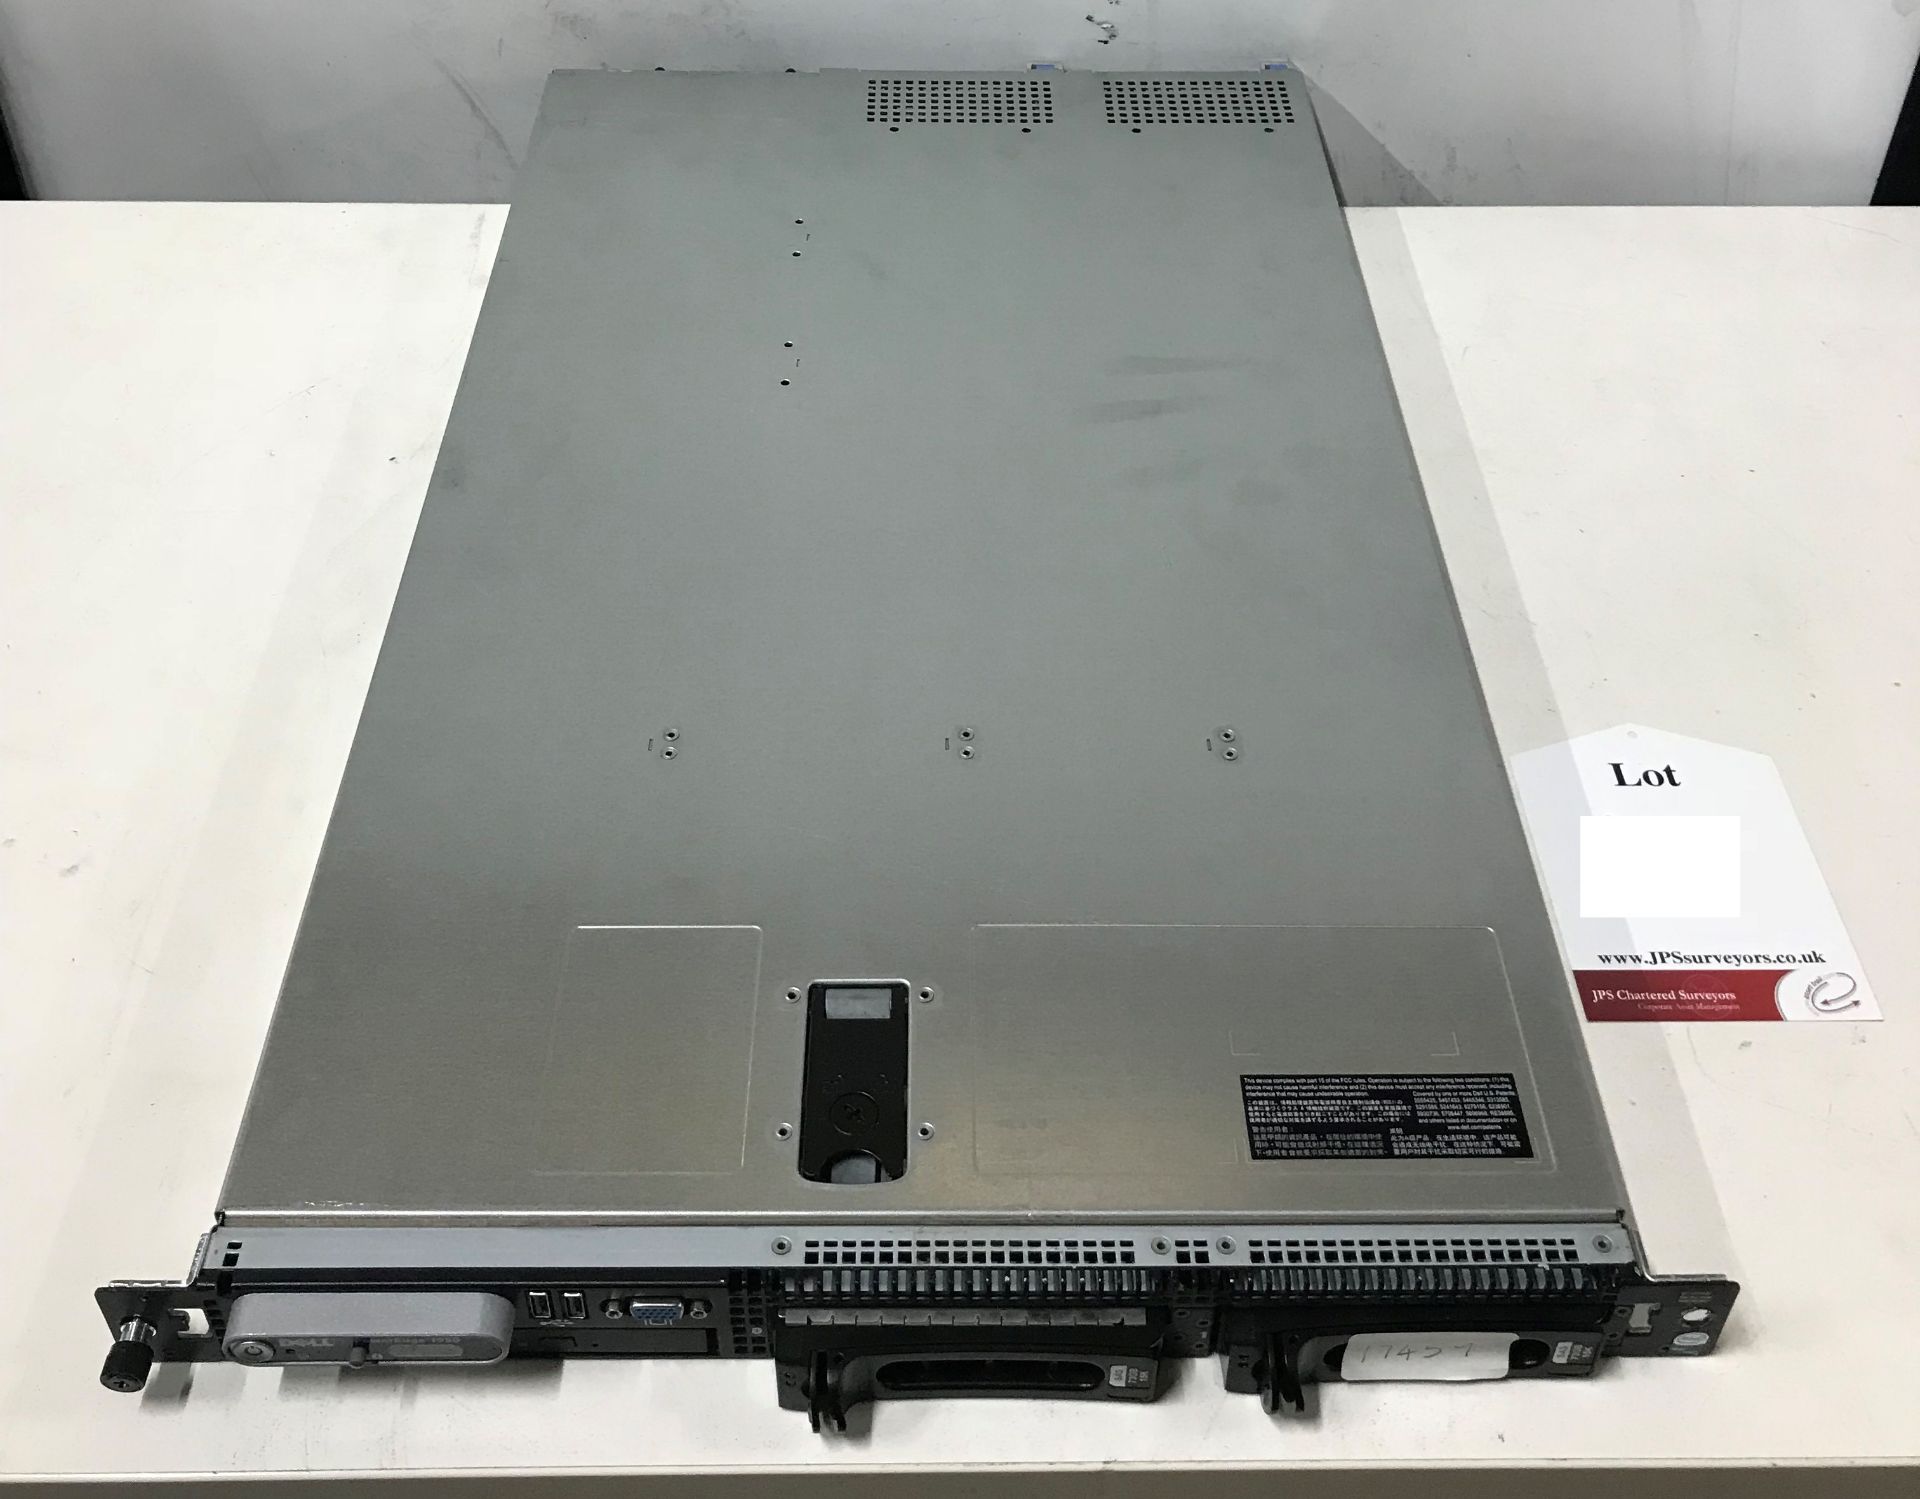 Dell PowerEdge Server Unit with 2 x 73GB HDD